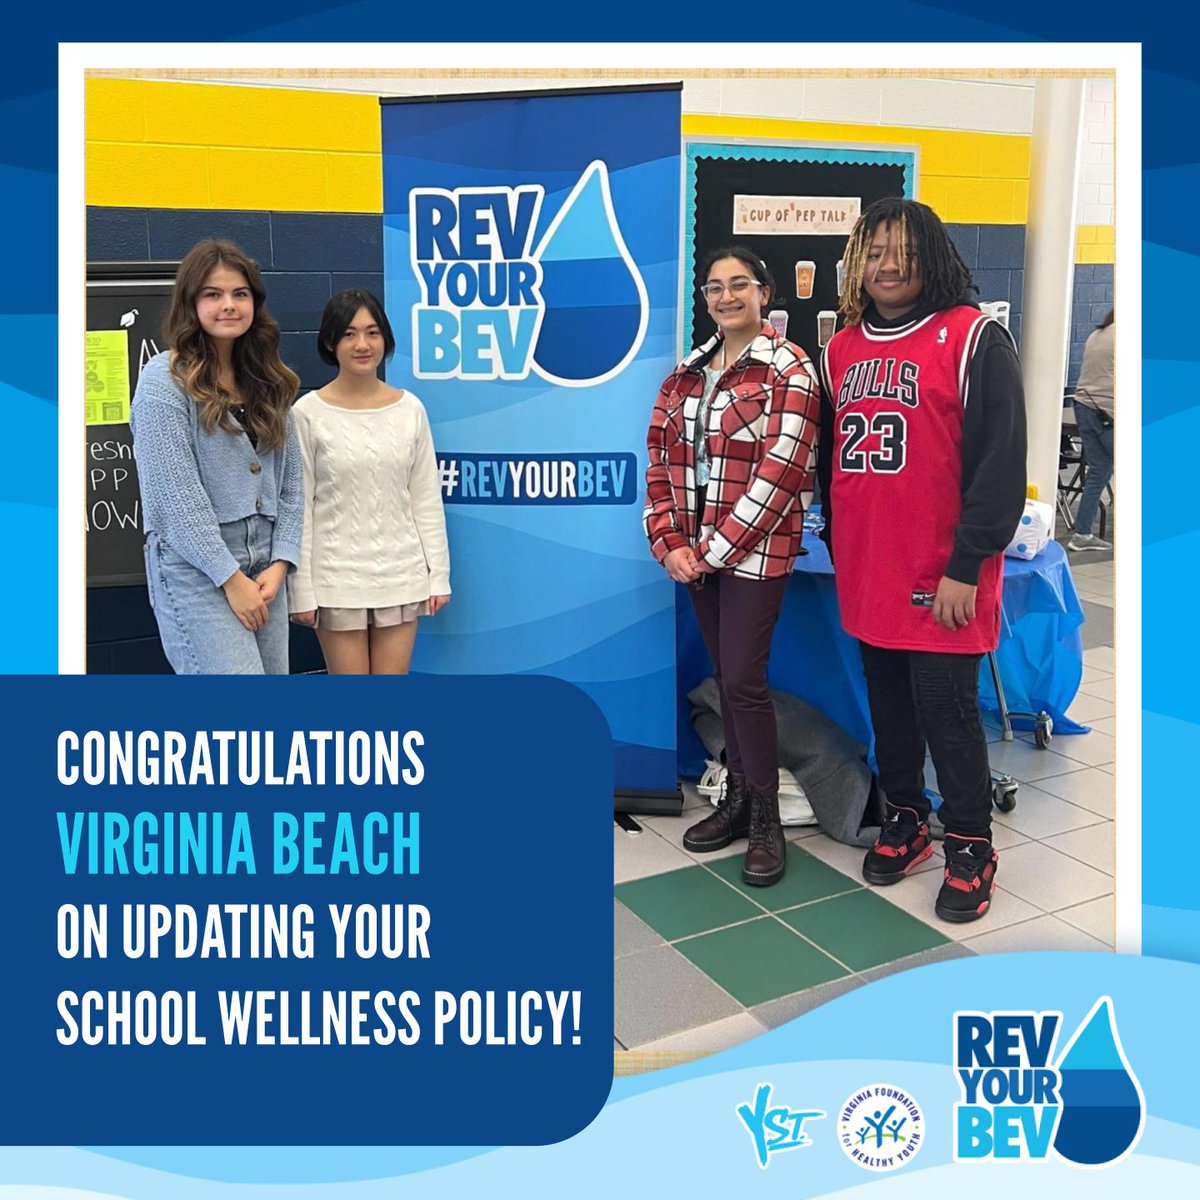 Get ready to rev up your water game because #RevYourBevWeek has finally arrived, and we're celebrating all across the state! 💧🎉 Thank you, @vbschools, for updating your School Wellness Policy. Let the fun begin! 😎 #RevYourBev #YStreetMovement @HealthyYouthVA